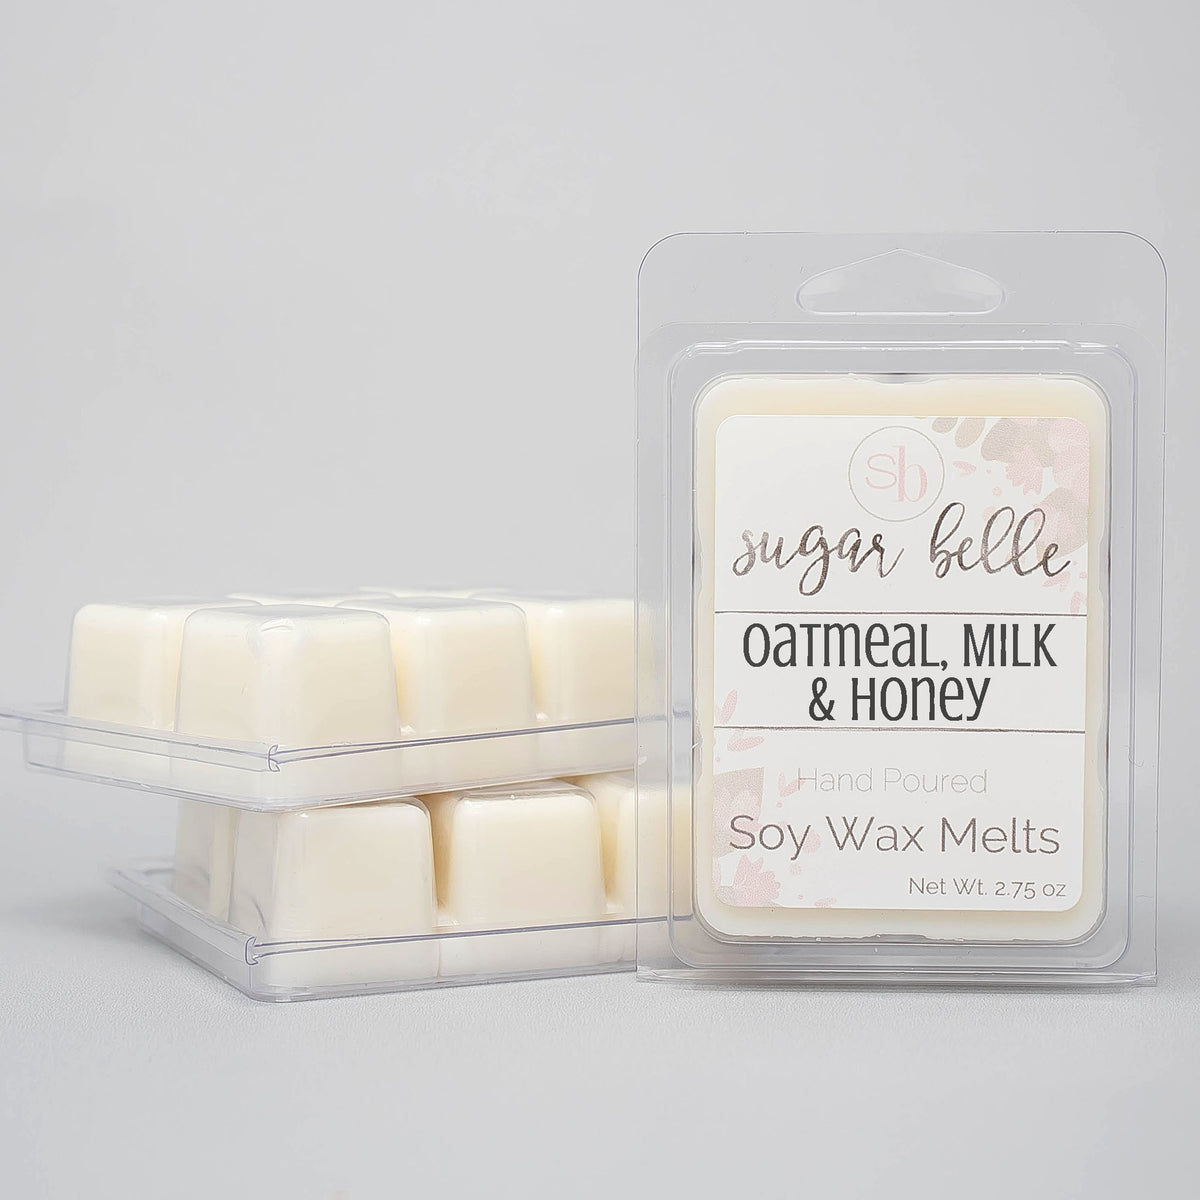 Oatmeal Milk & Honey Scented Wax Cubes  Small Batch. Hand Poured. – Sugar  Belle Candles